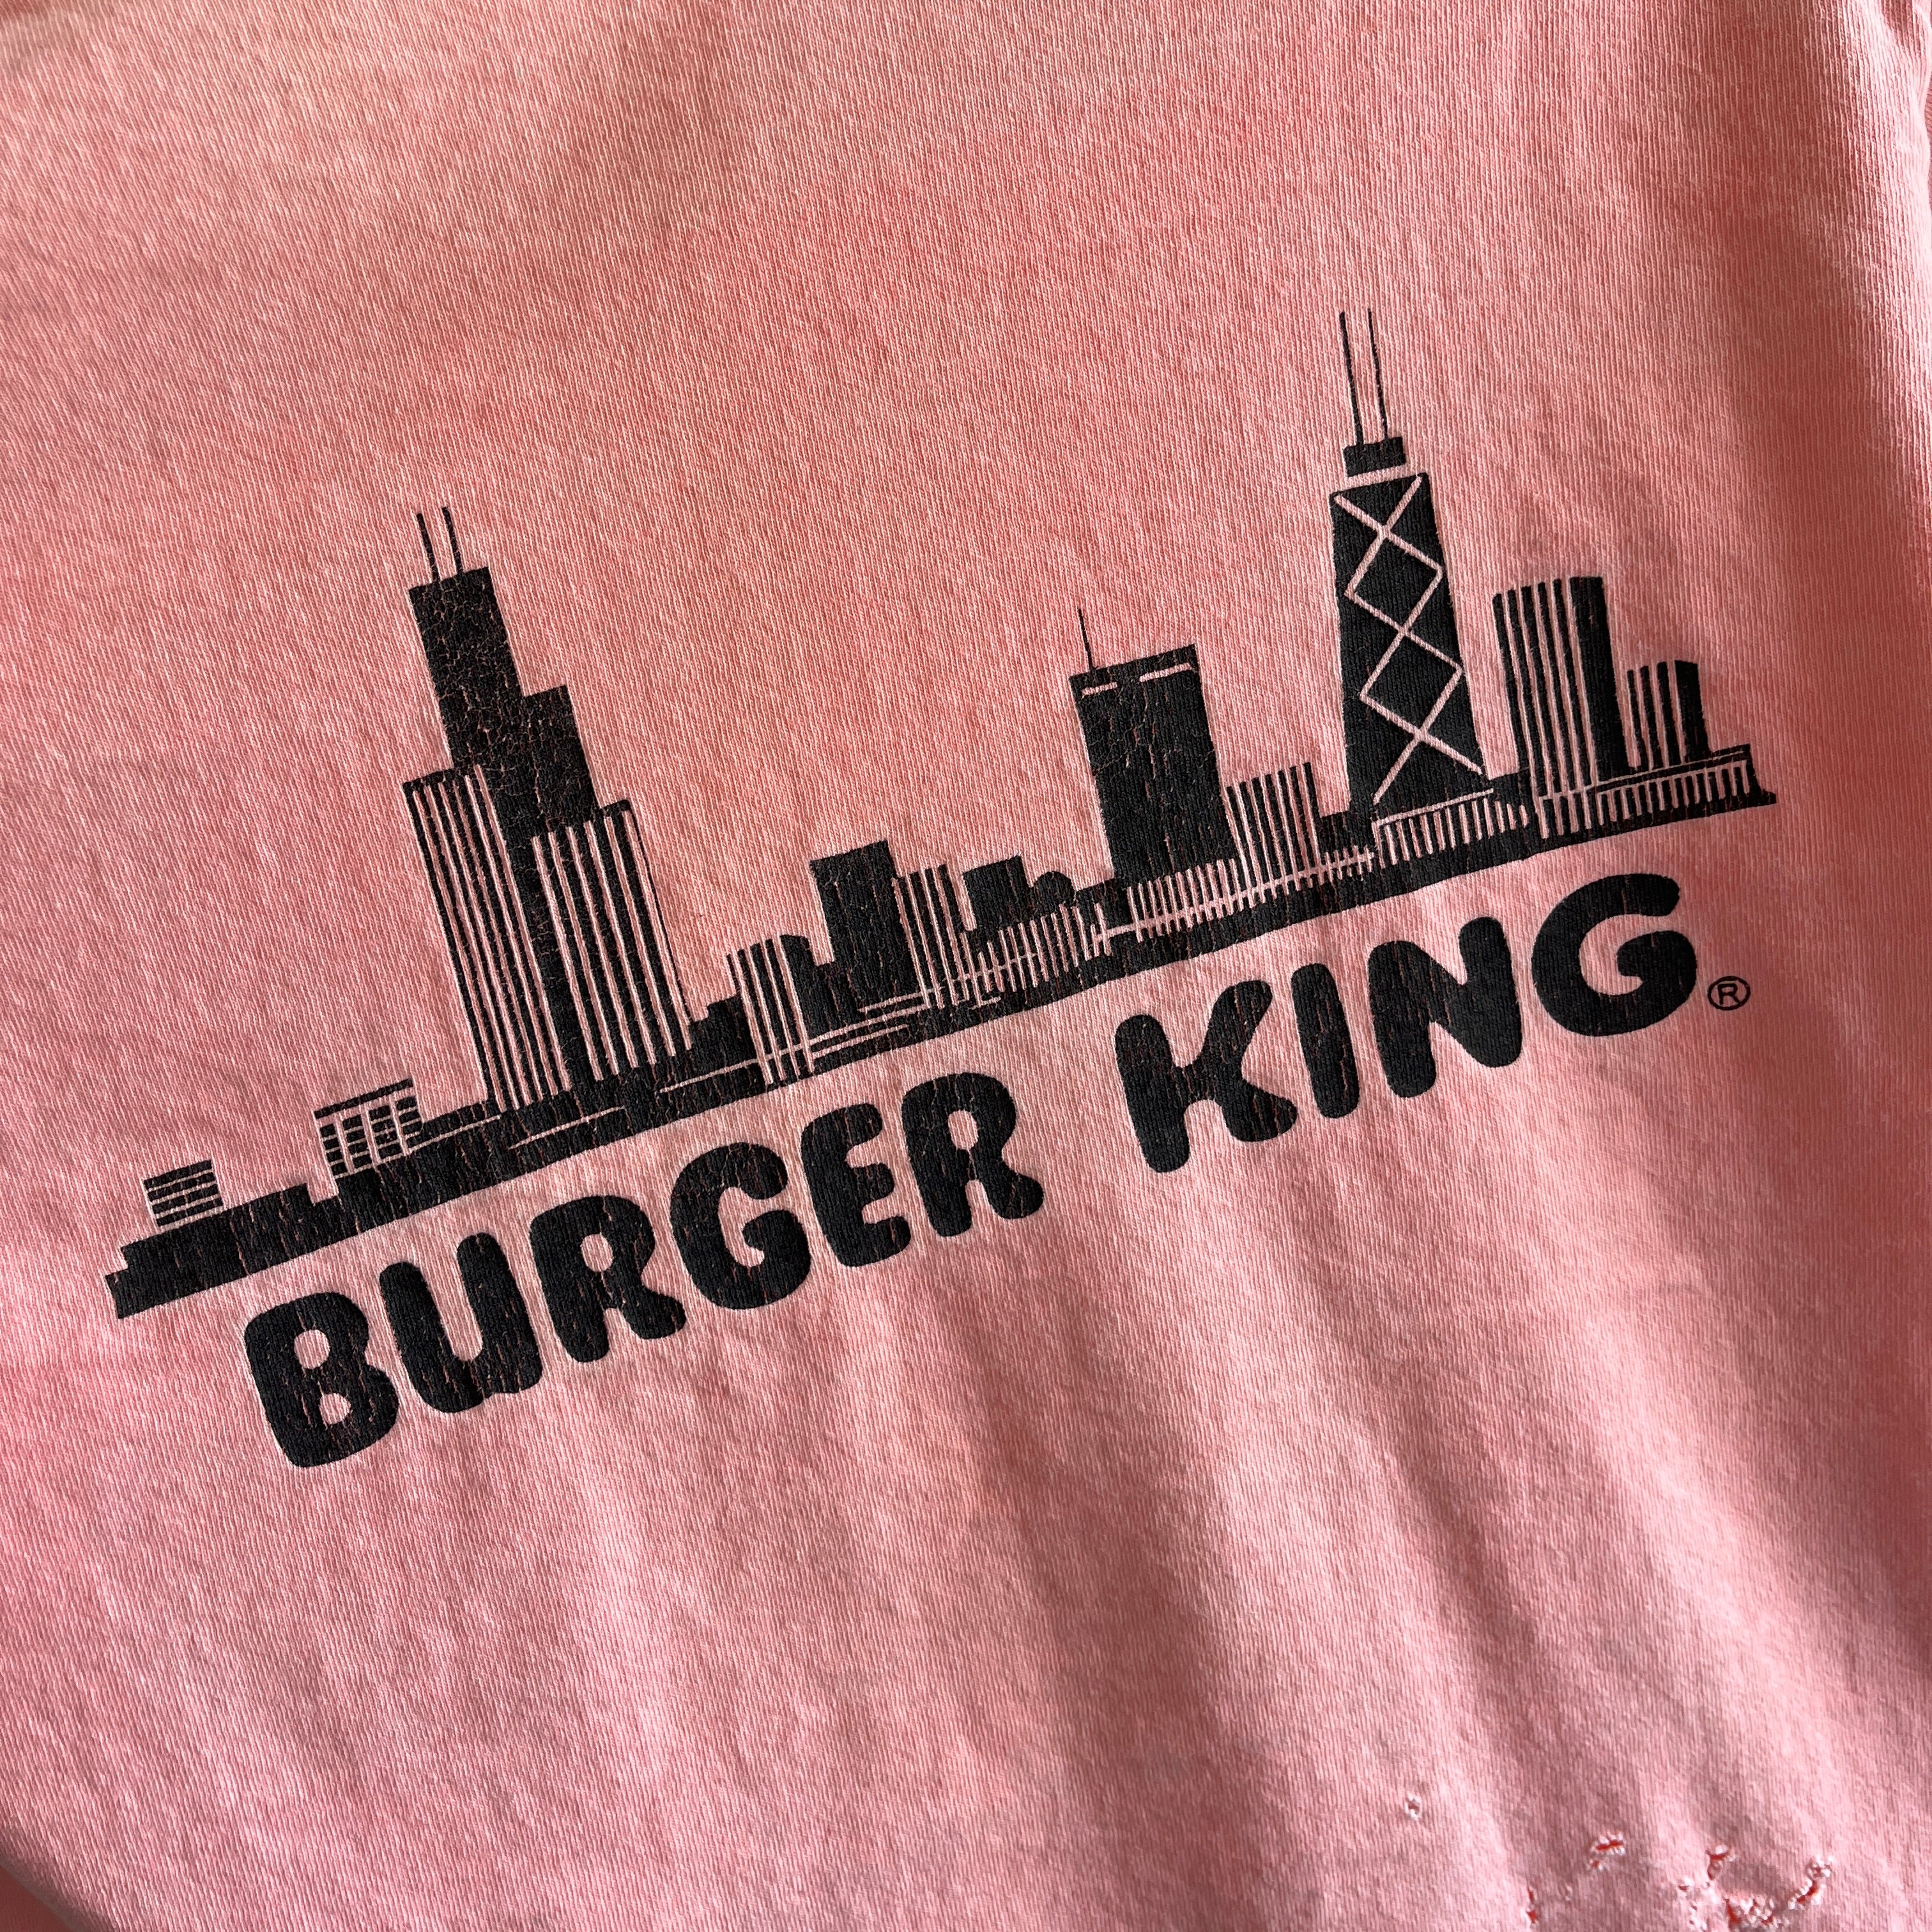 1991 BURGERKING Taste Of Chicago Front and Back T-shirt - THE BACK!